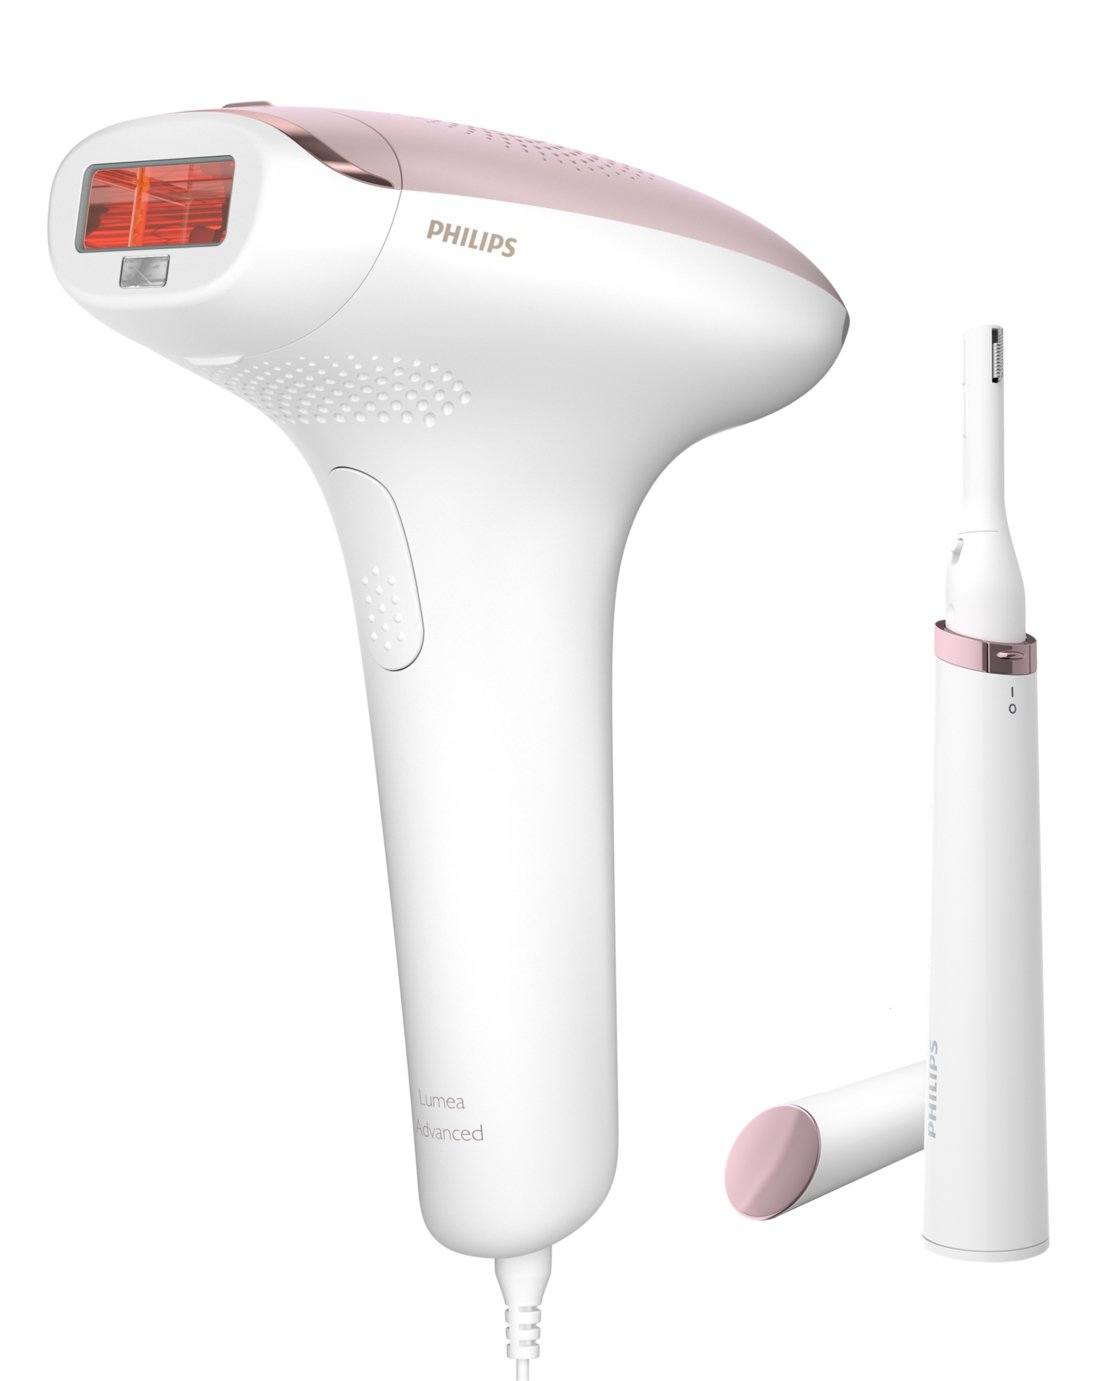 Philips Lumea BRI920/00 Corded IPL Hair Removal Device review